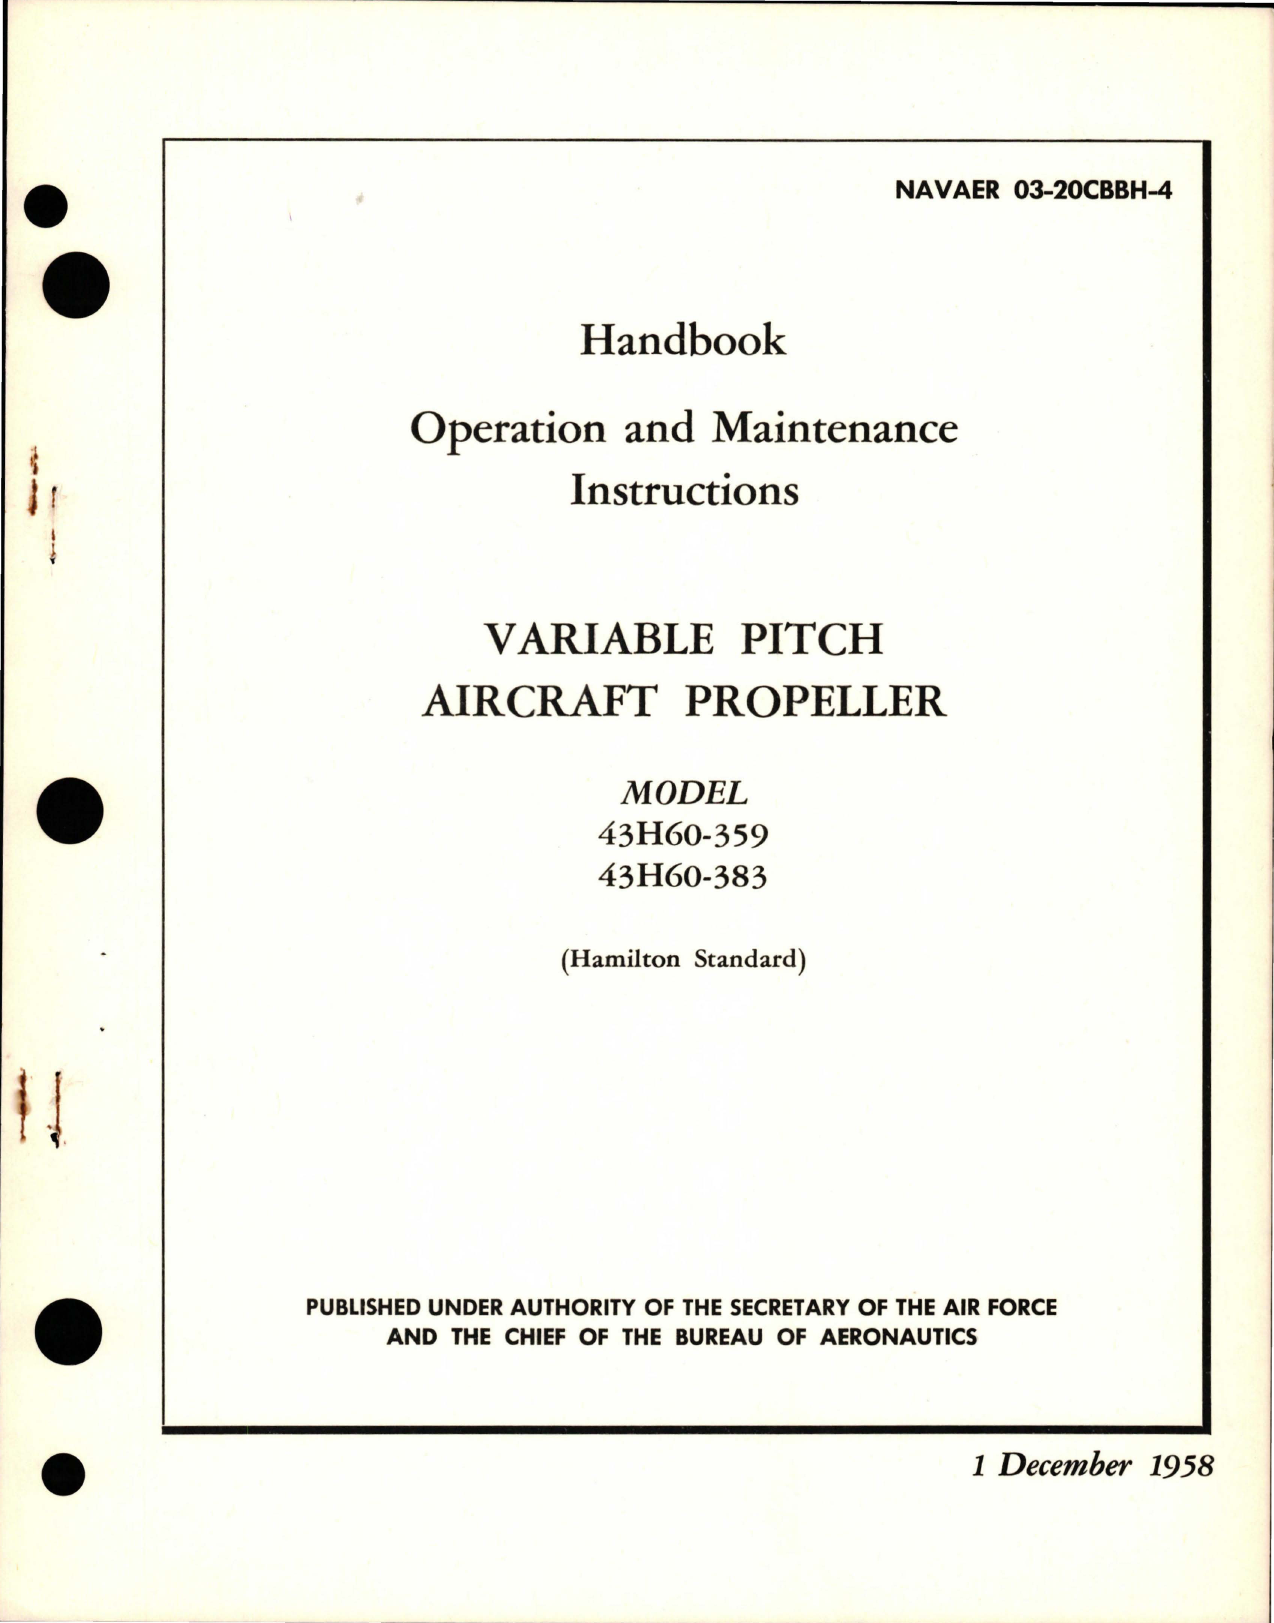 Sample page 1 from AirCorps Library document: Operation and Maintenance Instructions for Variable Pitch Propeller - Model 43H60-359 and 43H60-383